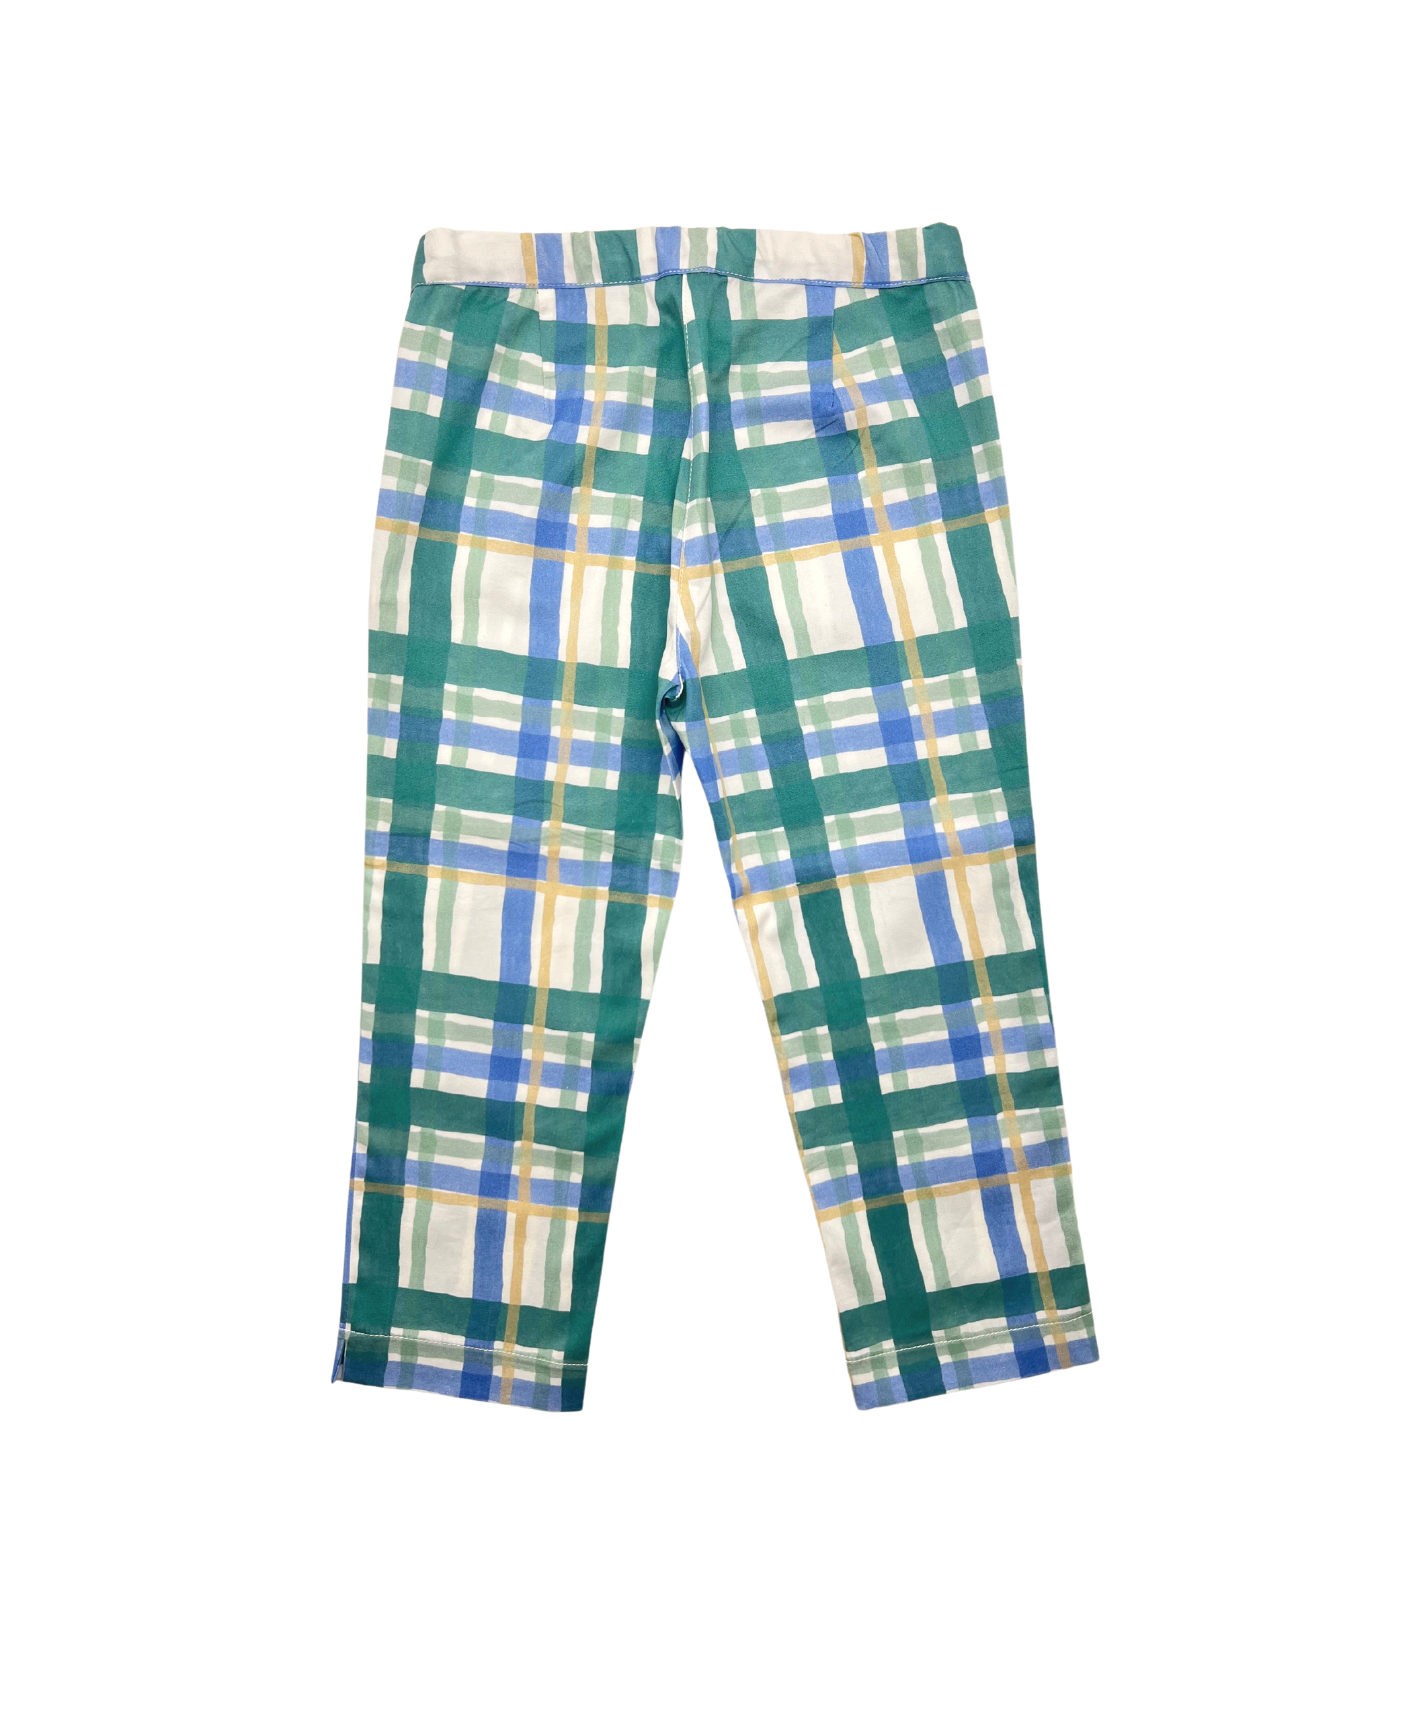 IL GUFO - Checkered pants - 8 years old